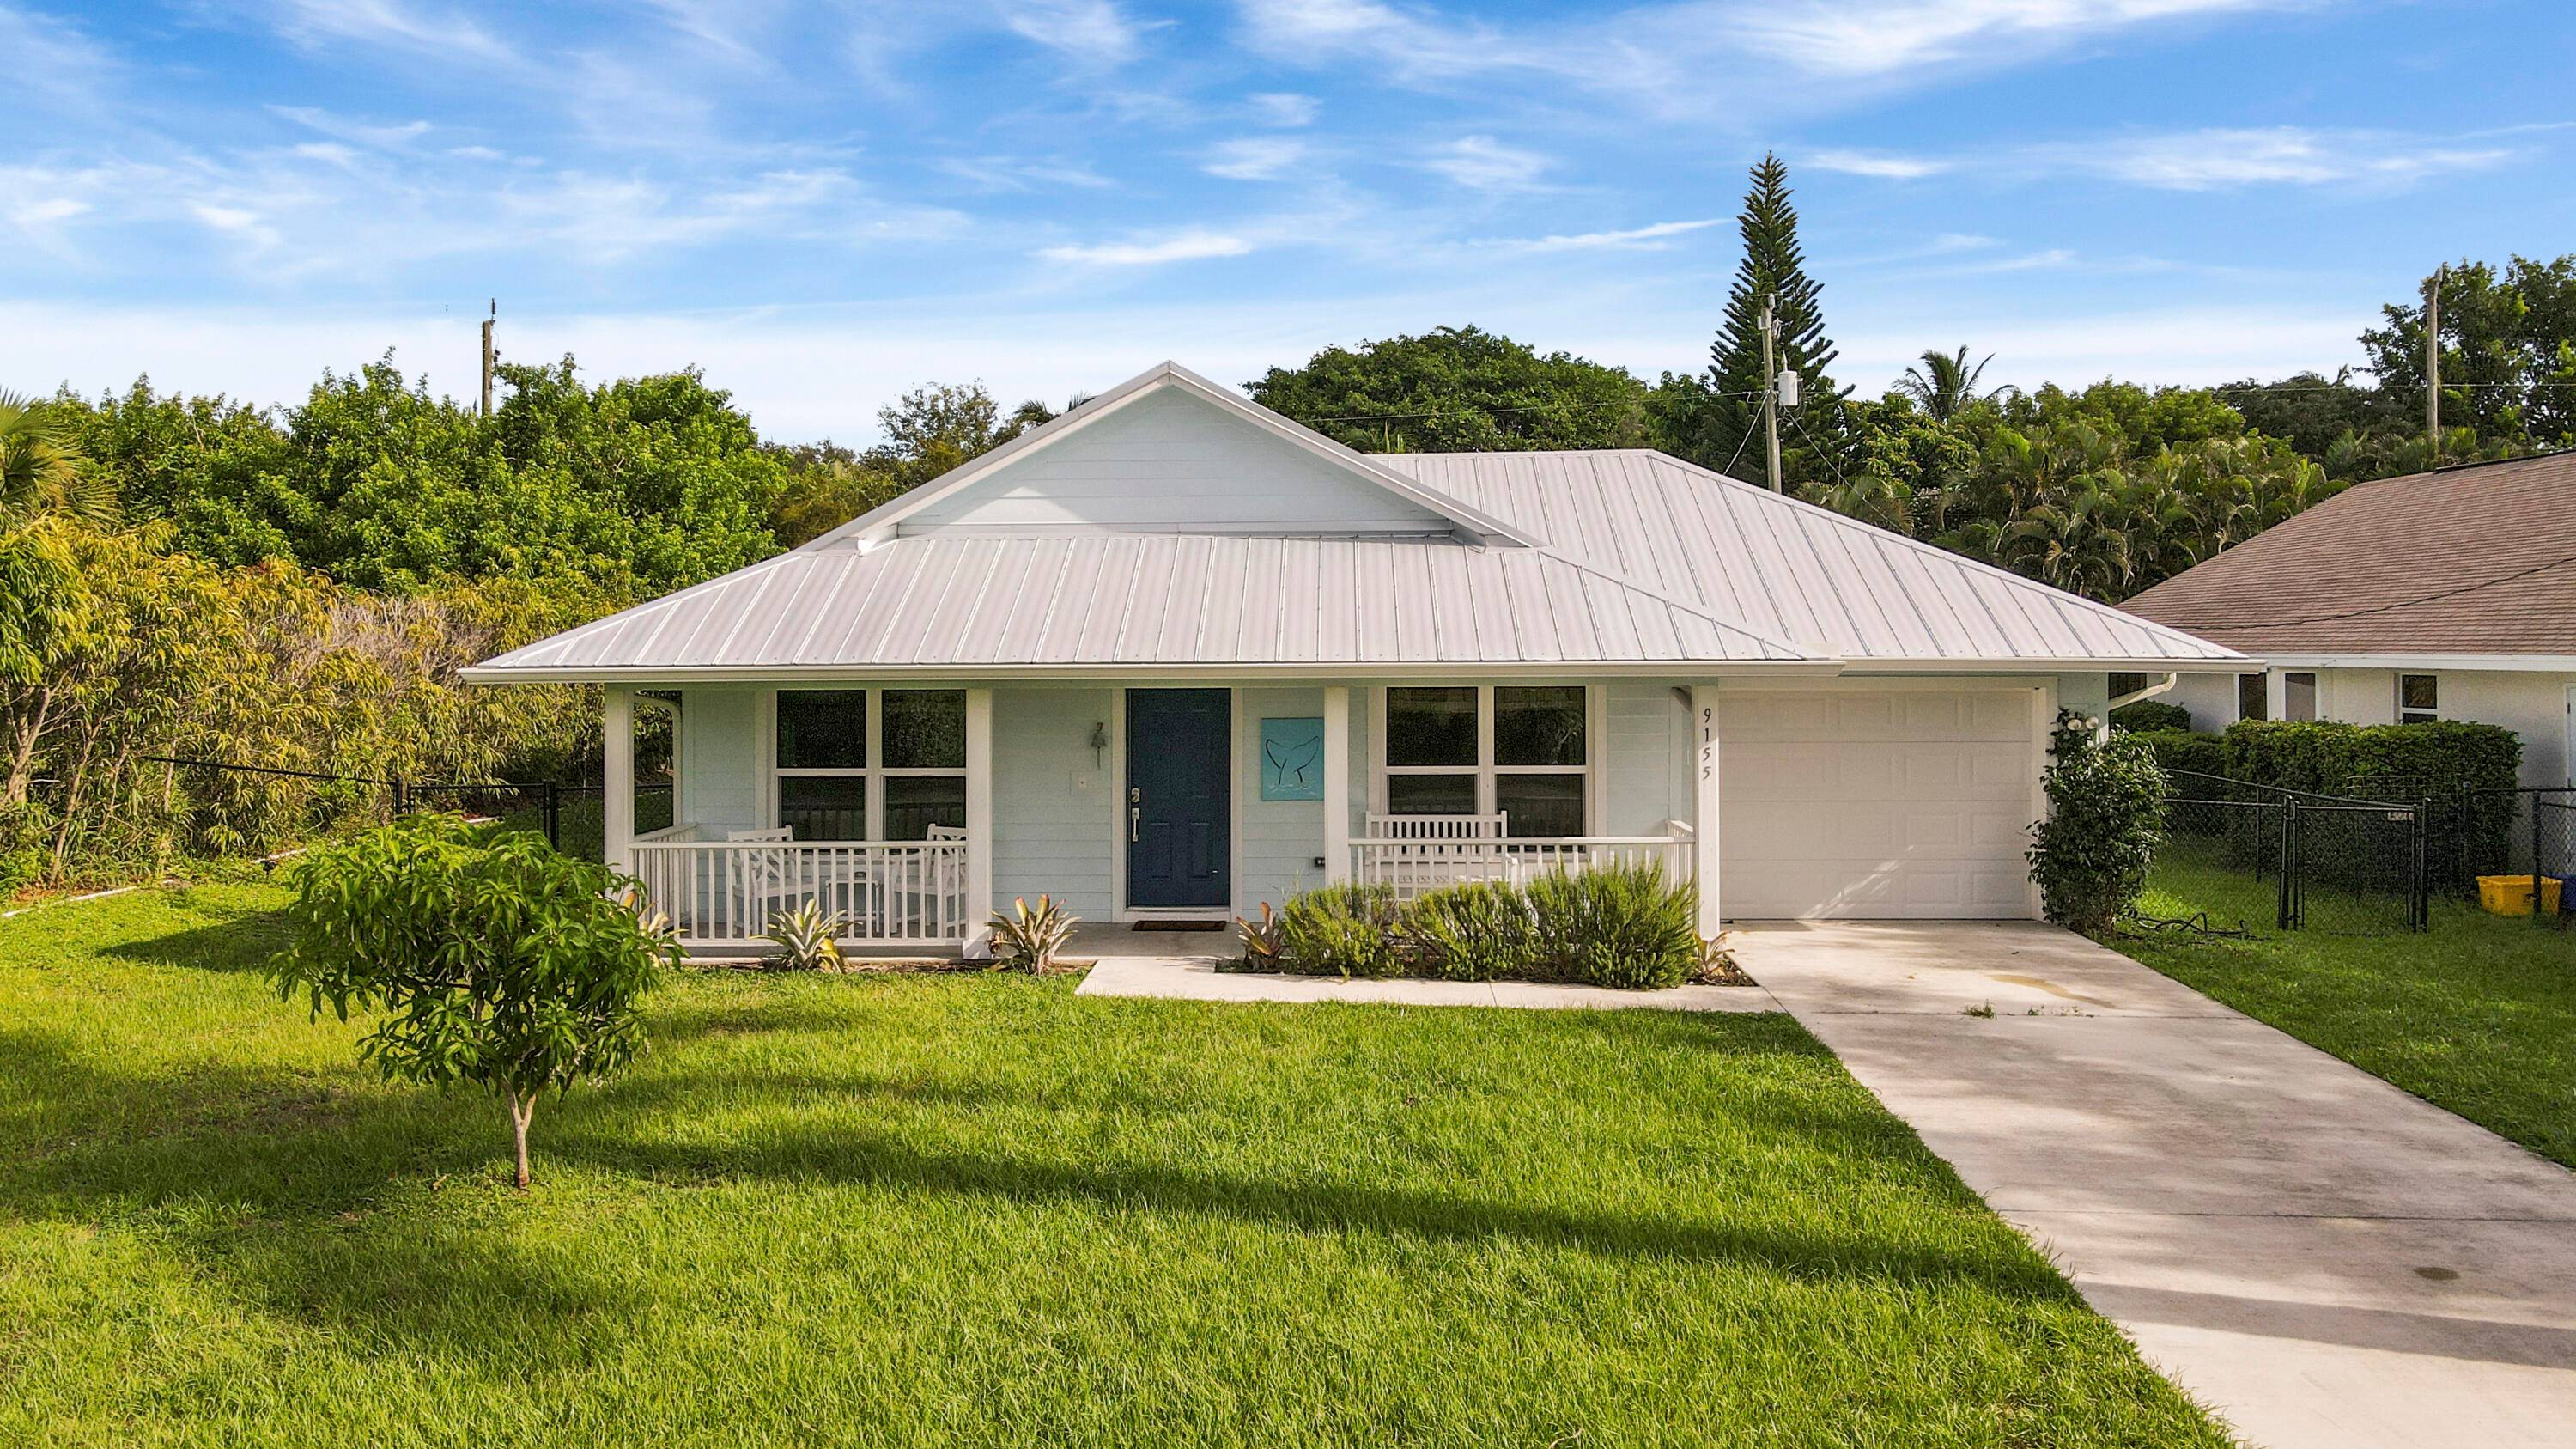 Beautiful Key West Style 3 bed 2 bath 1 car garage home that comes with access to the Hobe Sound Boat Ramp Dock !